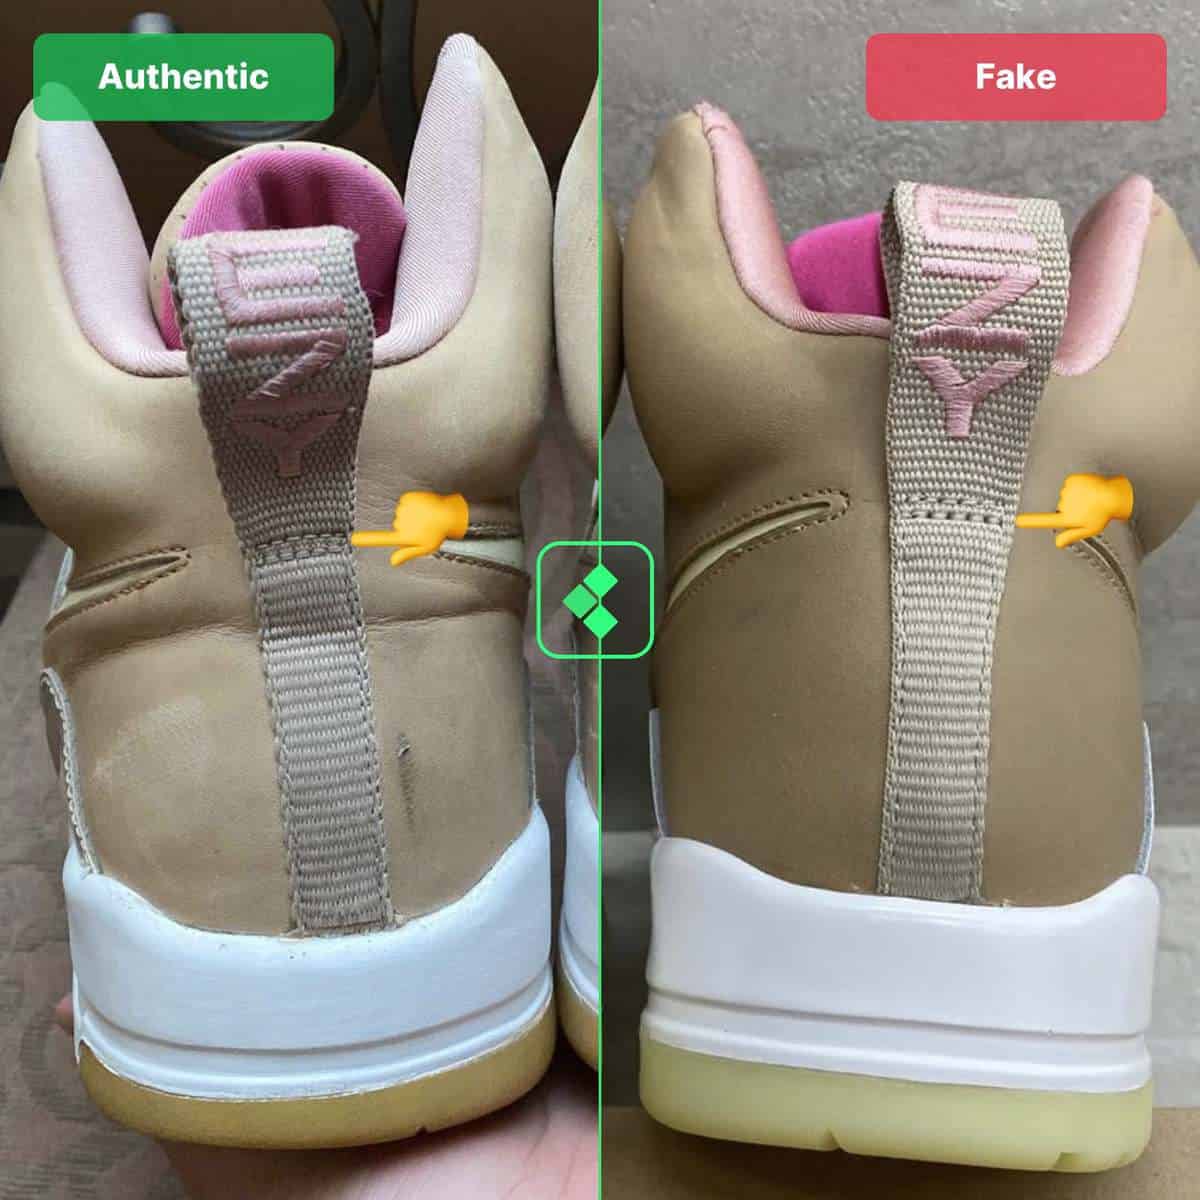 Nike Air Yeezy 1 Fake Vs Real - How To 